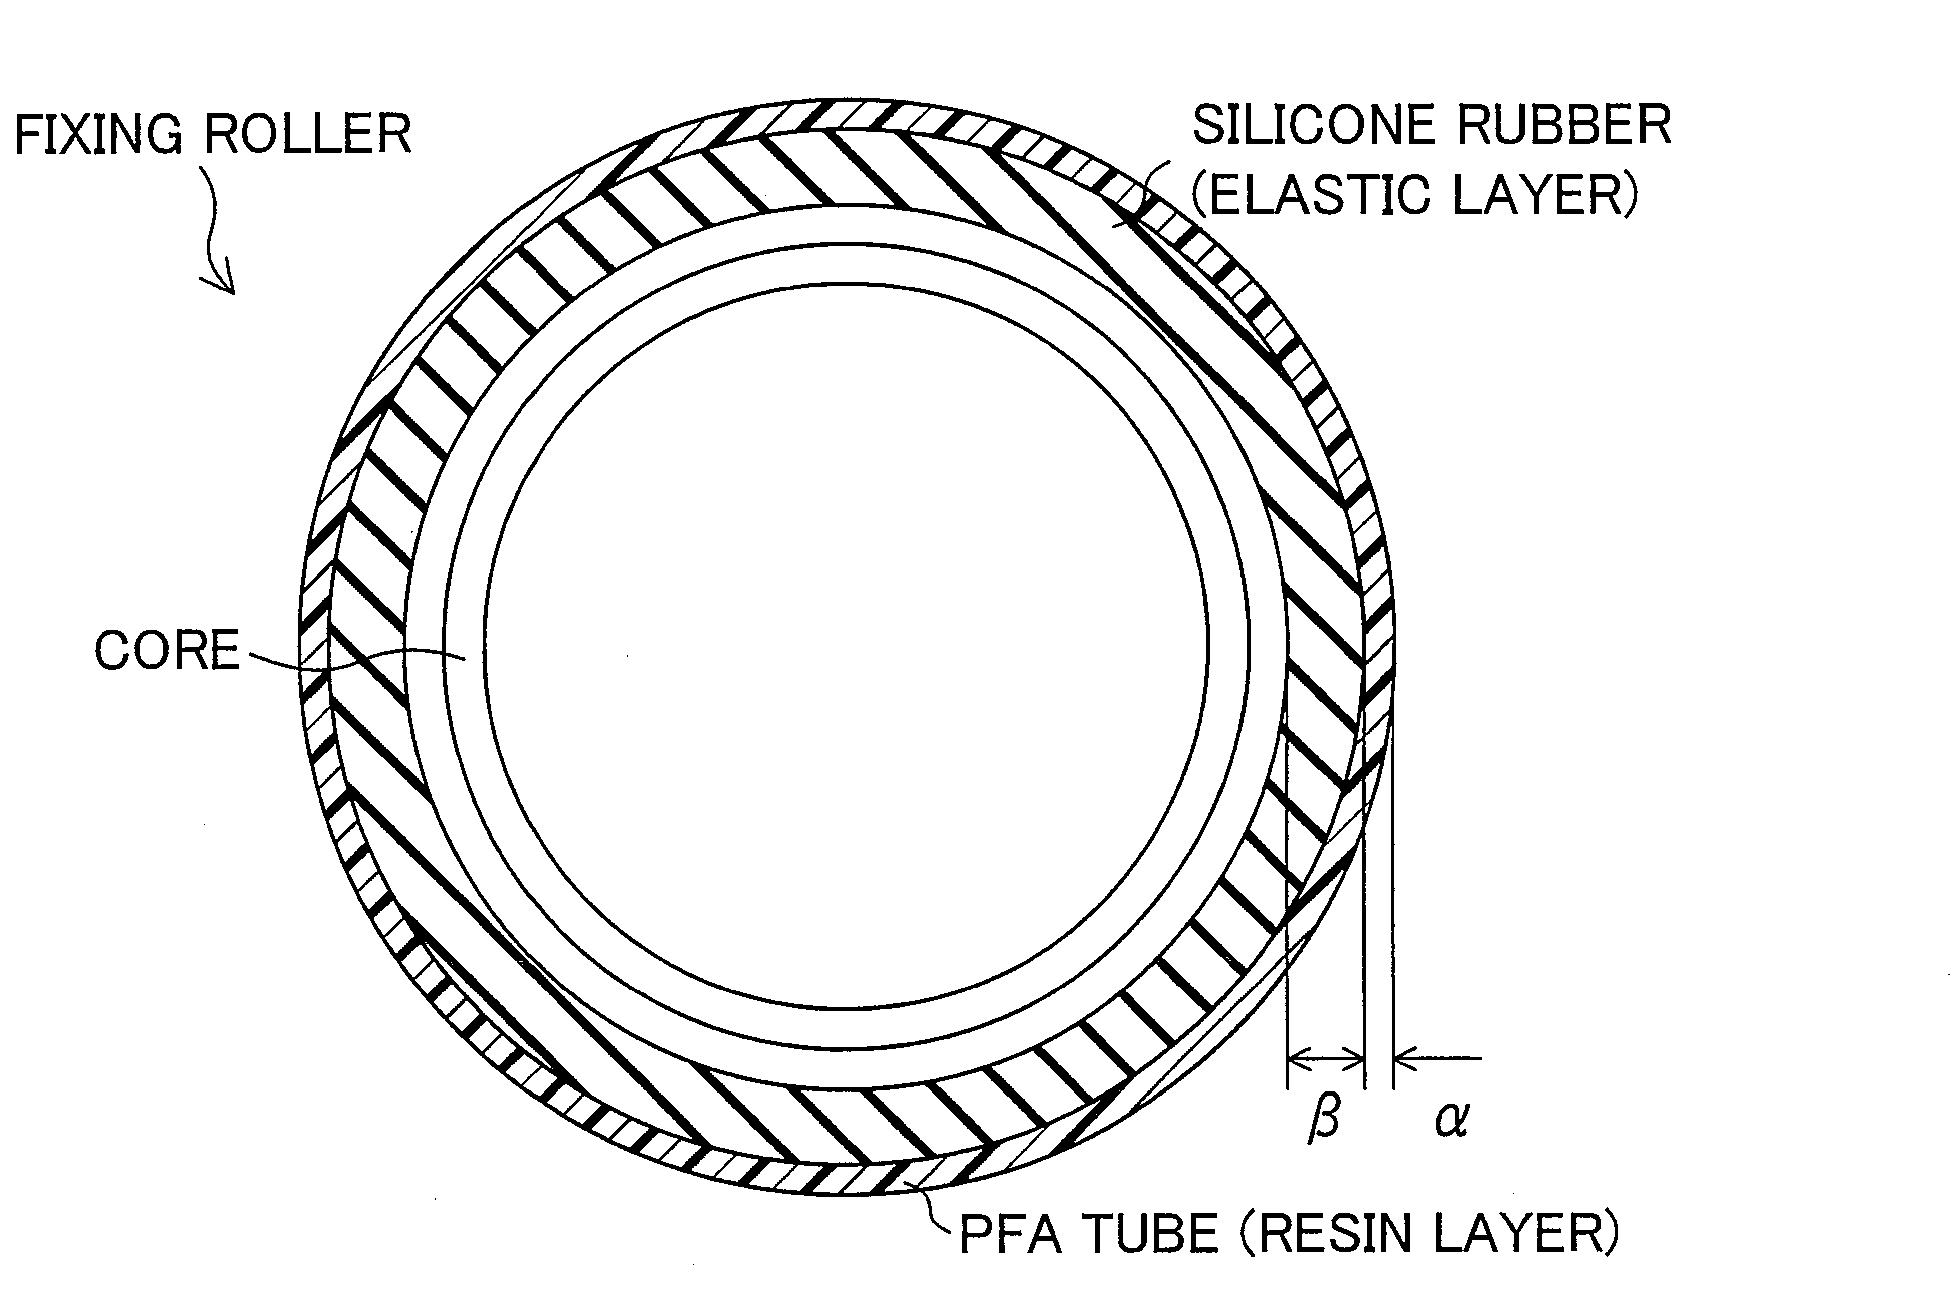 Fixing roller and image forming apparatus